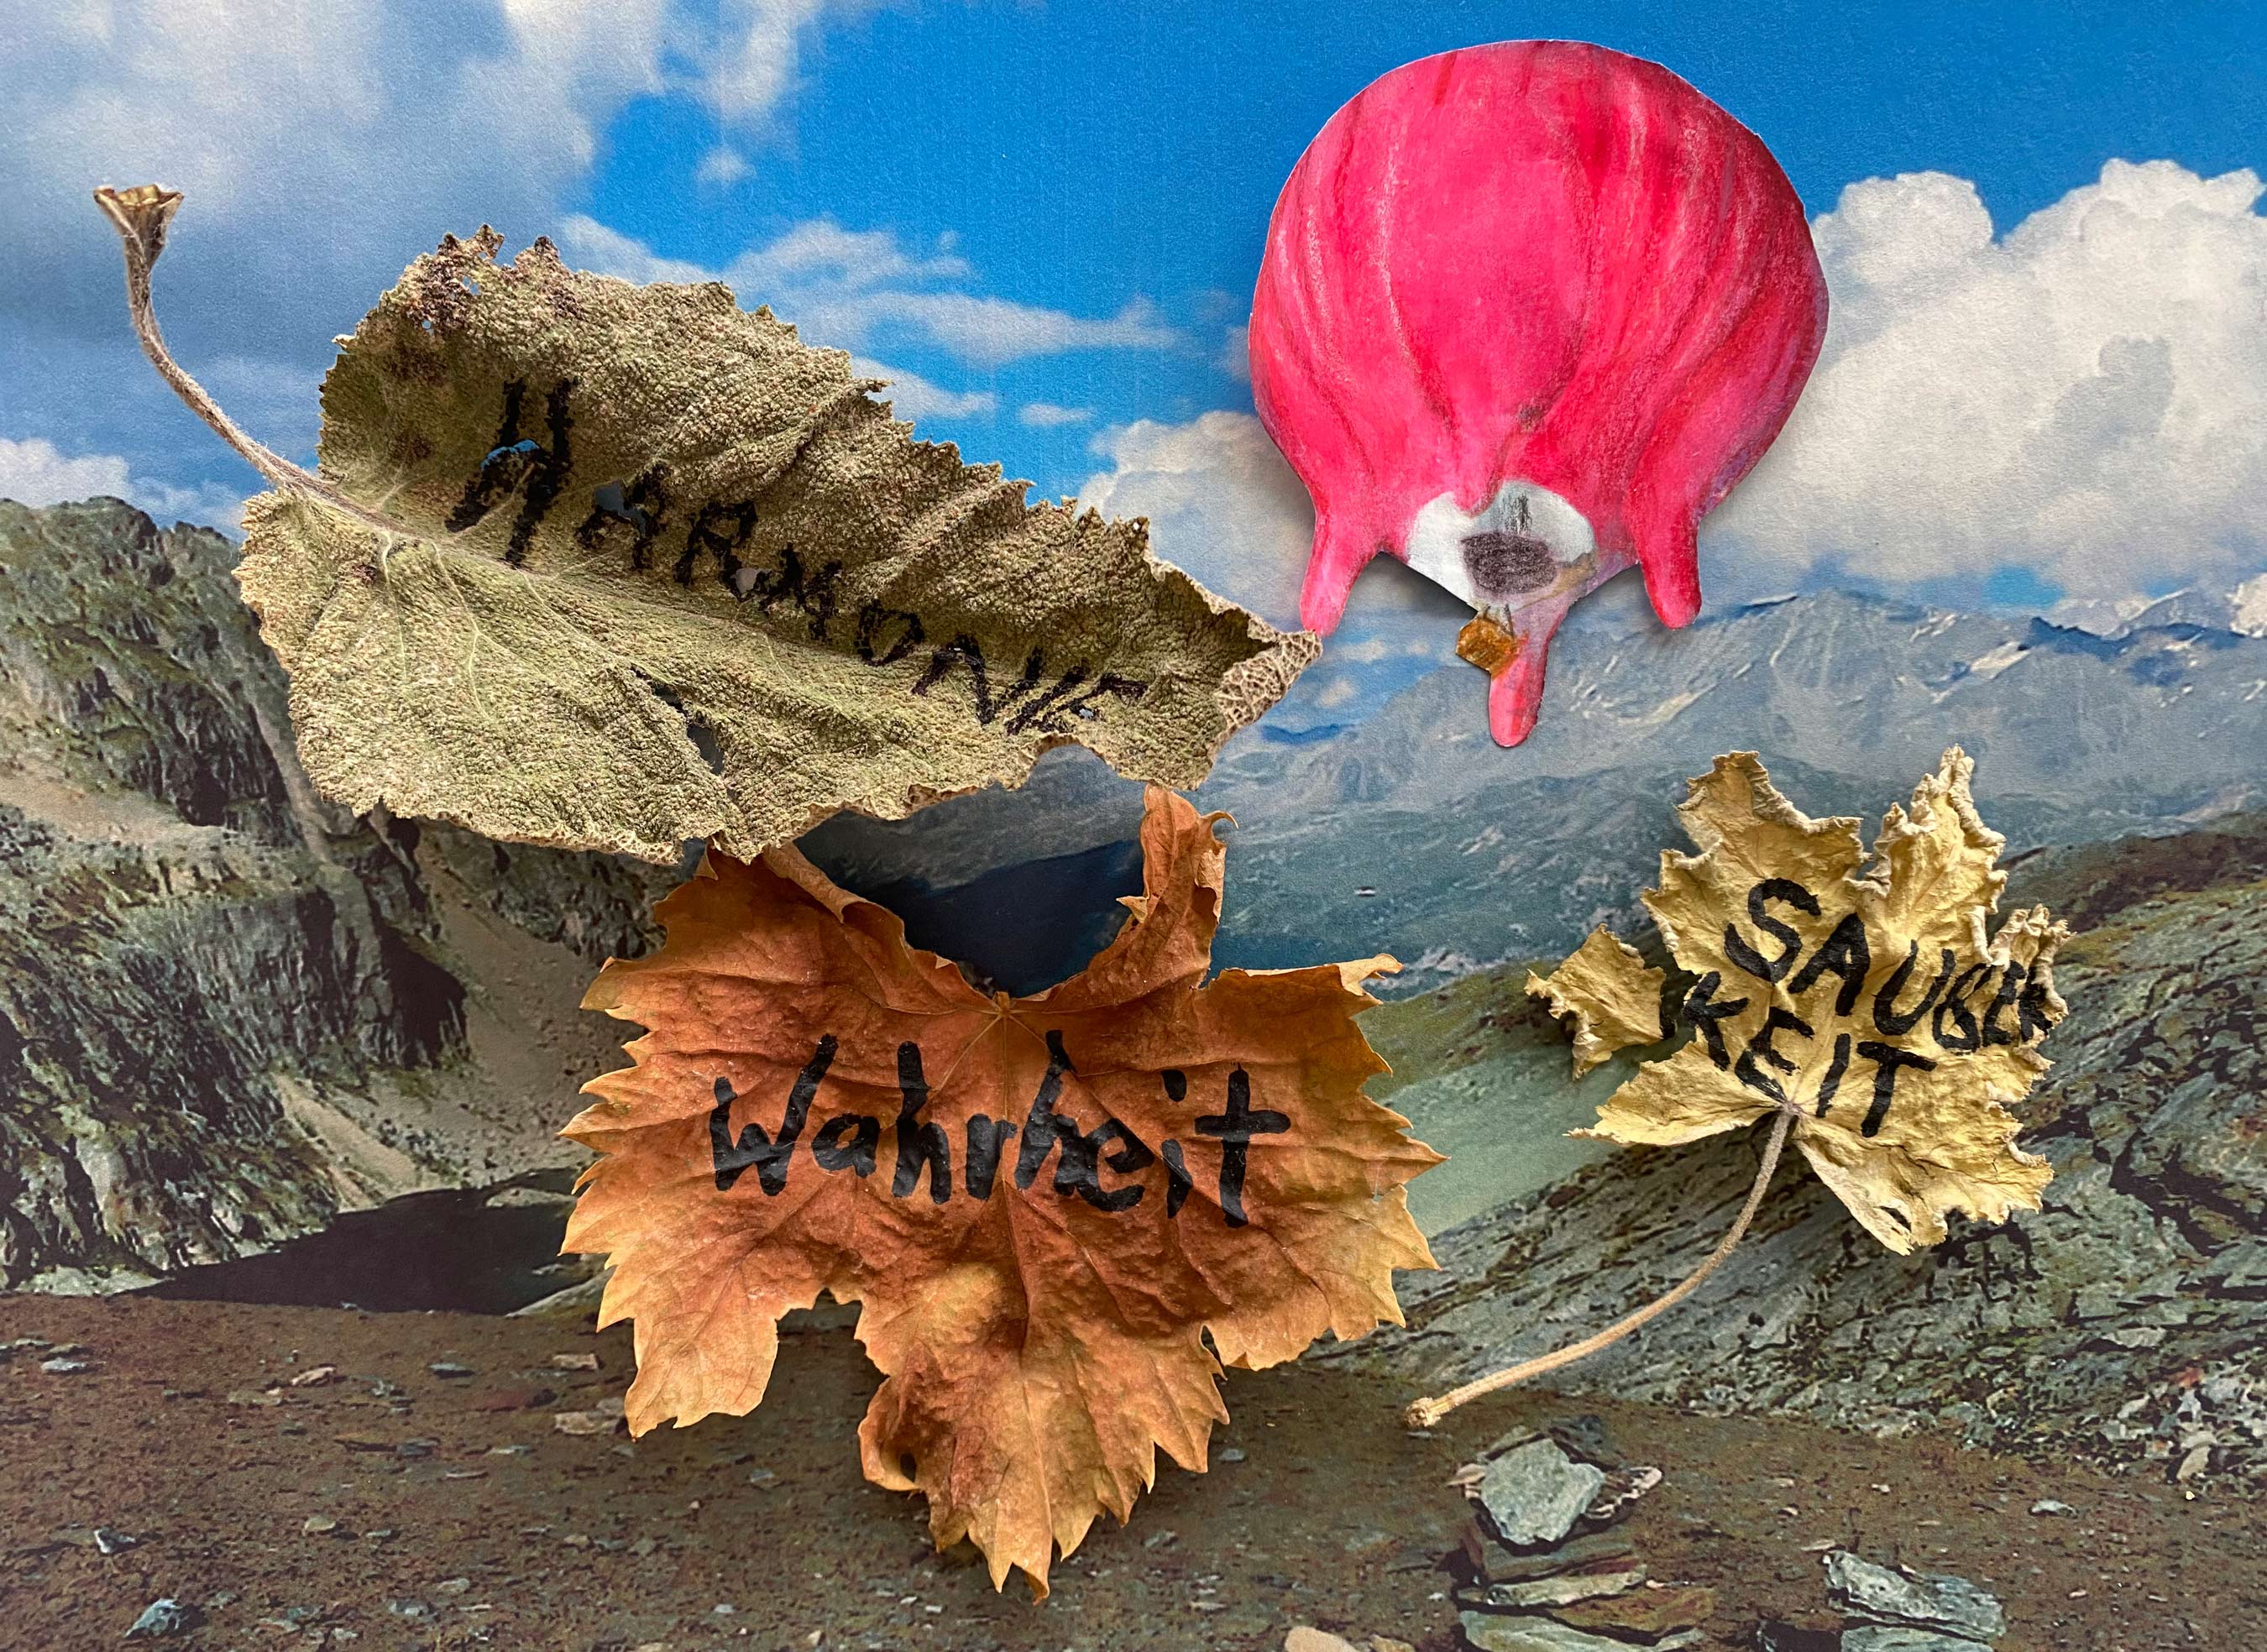 Collage of the Flying udder and leaves above Pass Lunghin, Switzerland.